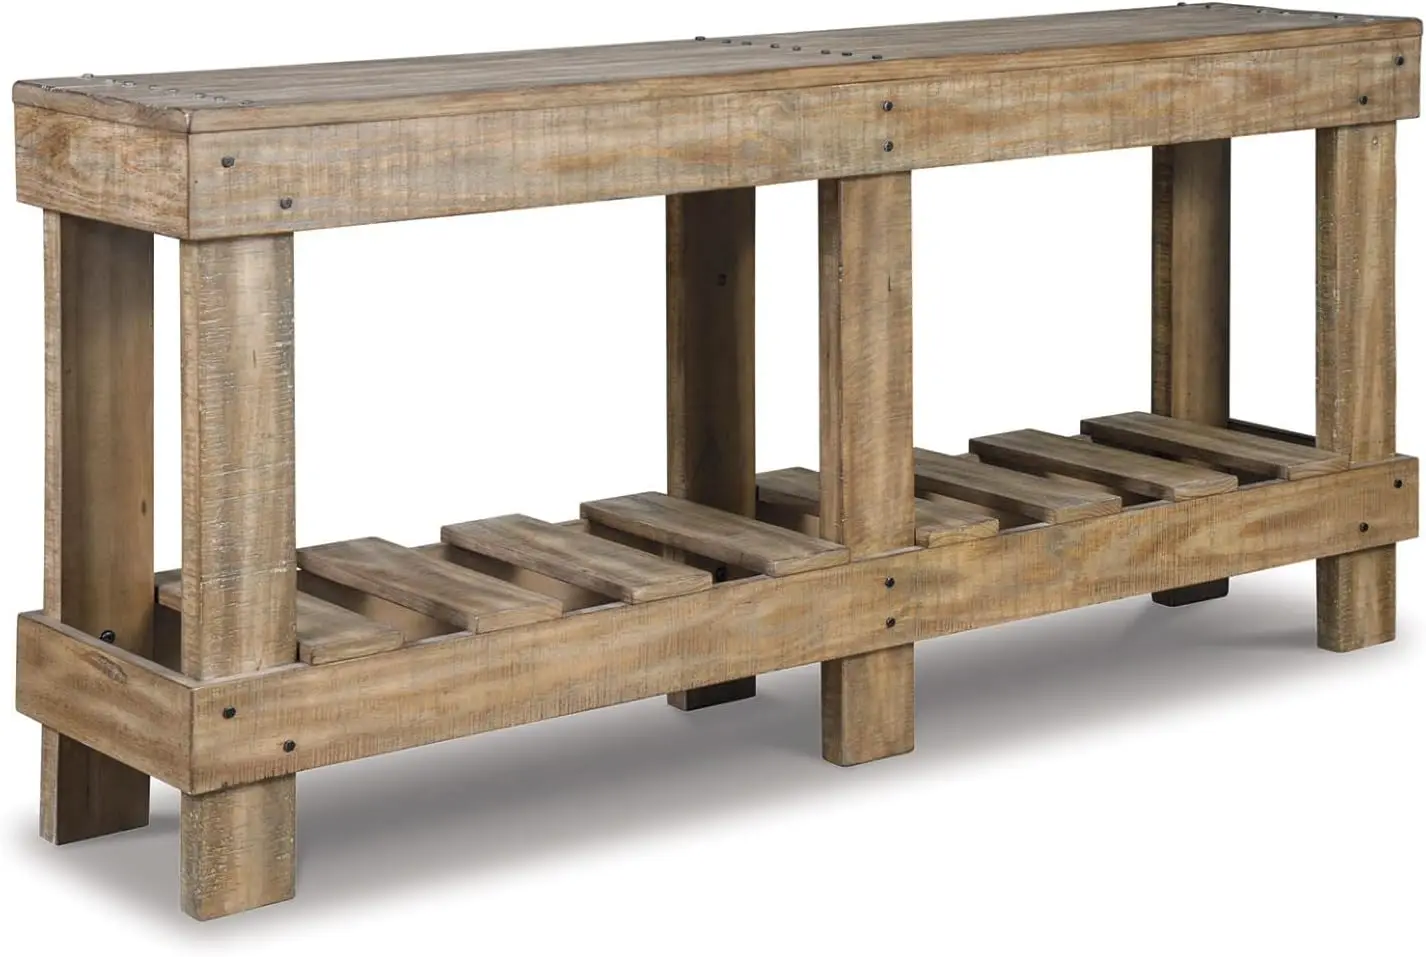 

Signature Design by Ashley Susandeer Rustic Farmhouse Console Sofa Table, Brown